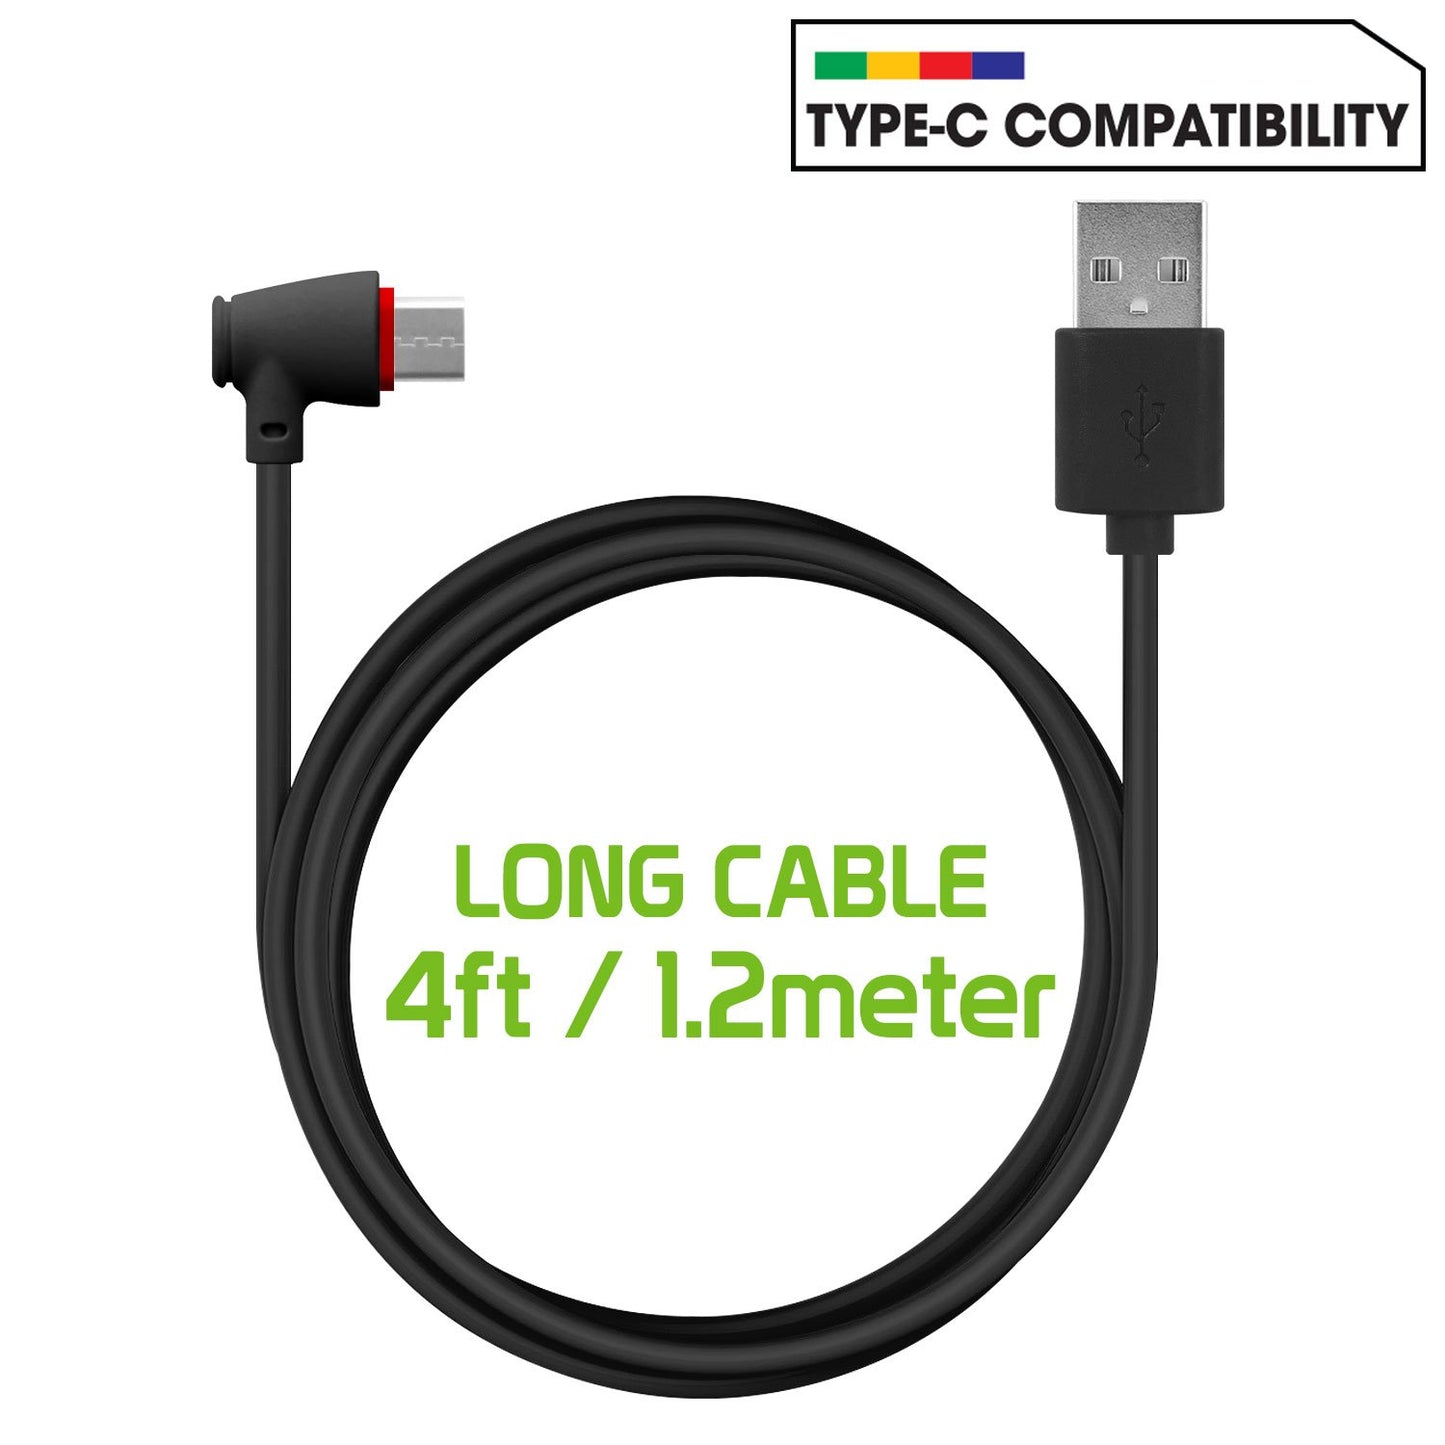 DCA904BK - USB C to USB-A Cable with 90 Degree Connector 4 Feet Charging & Data Sync Cable